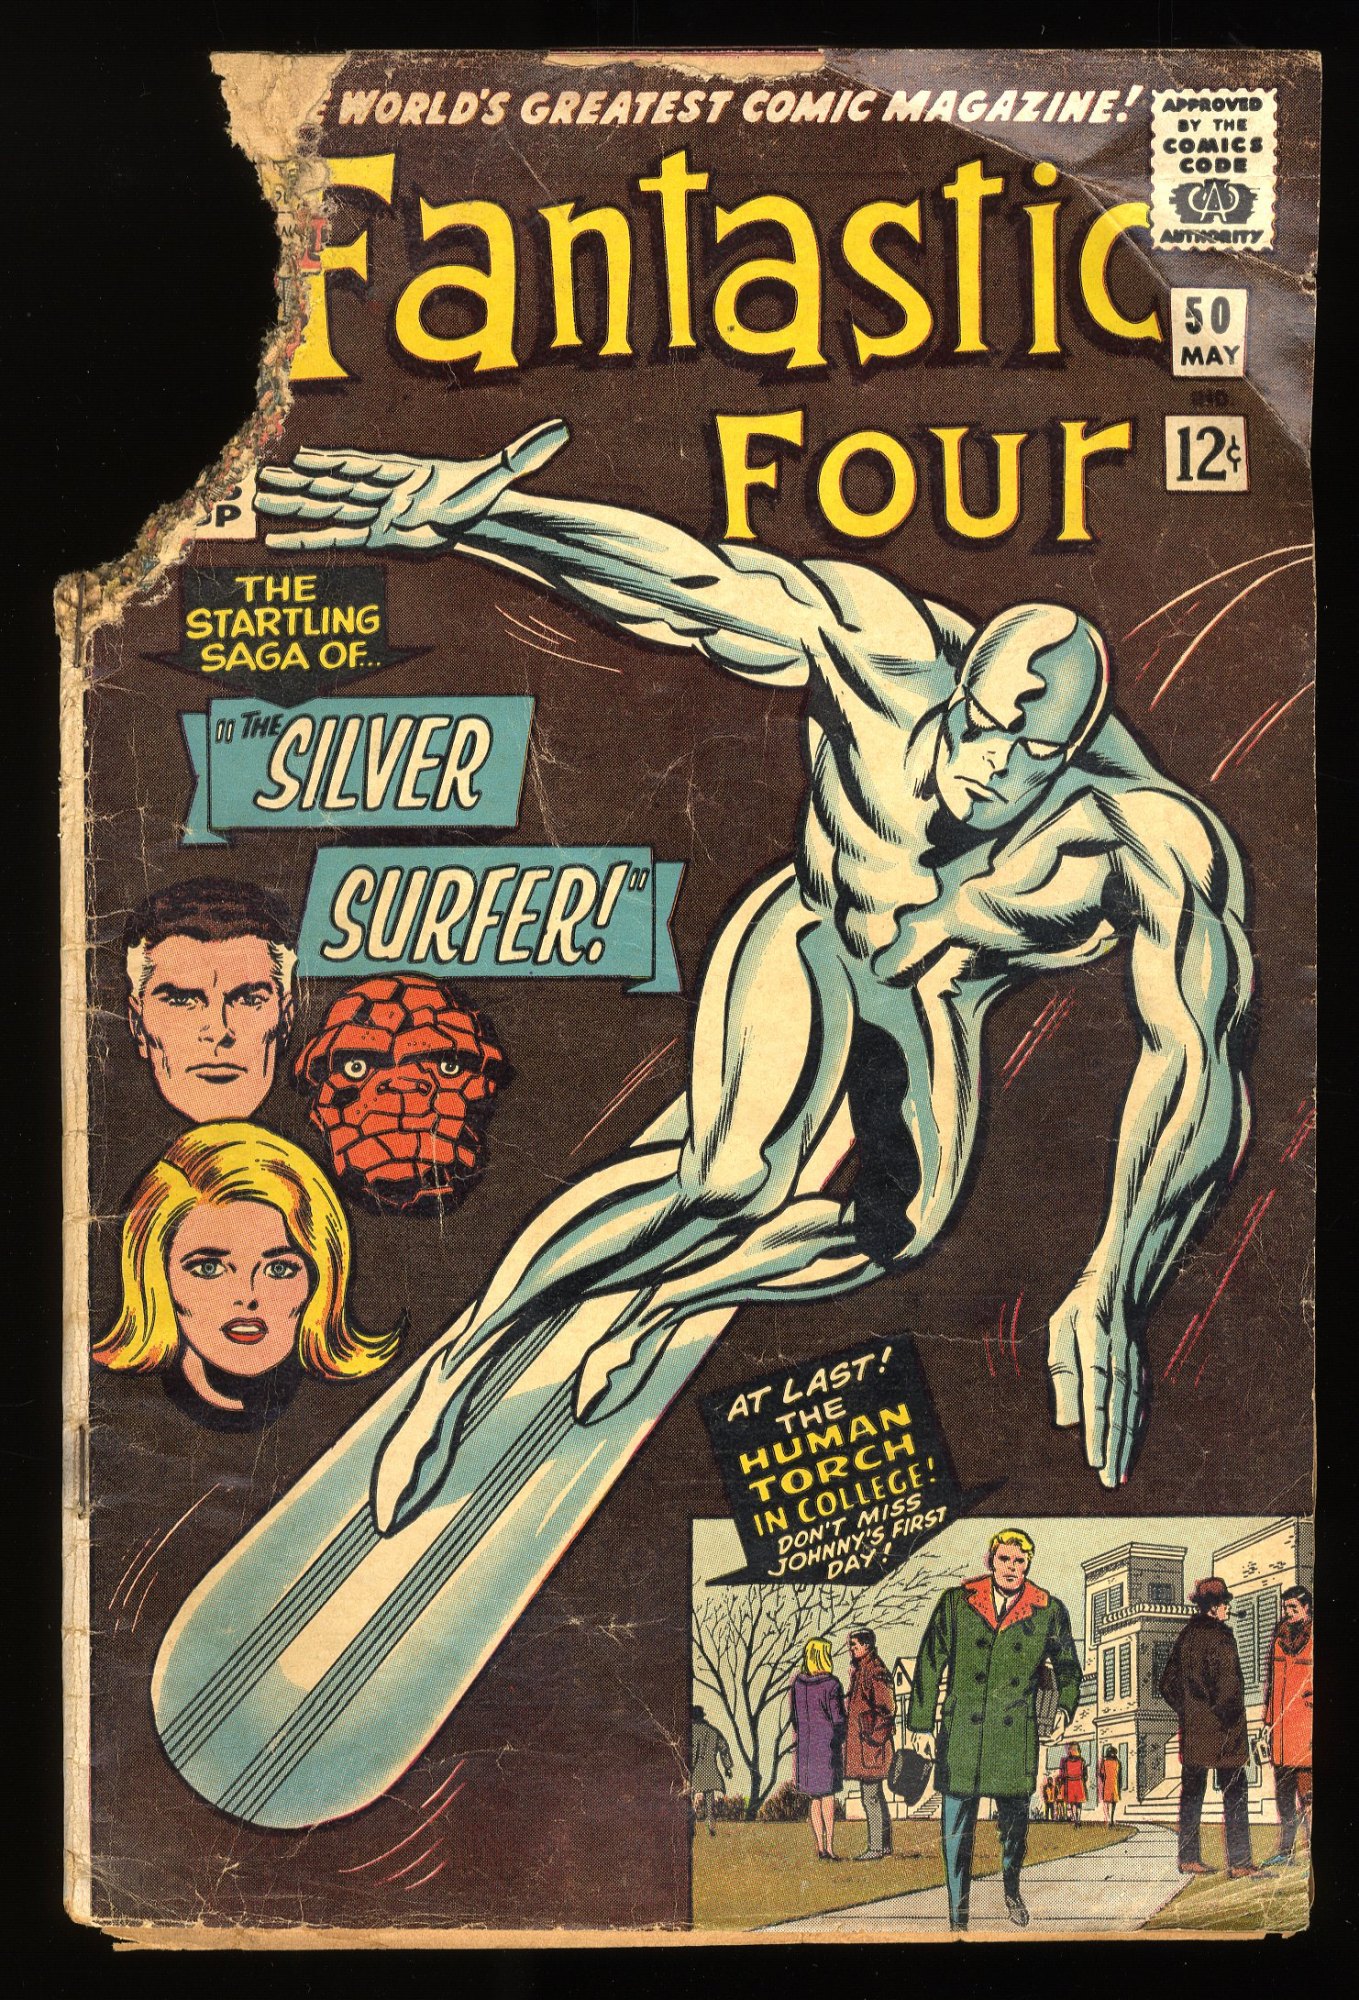 Image: Fantastic Four #50 Inc 0.3 3rd Appearance Silver Surfer! Human Torch!